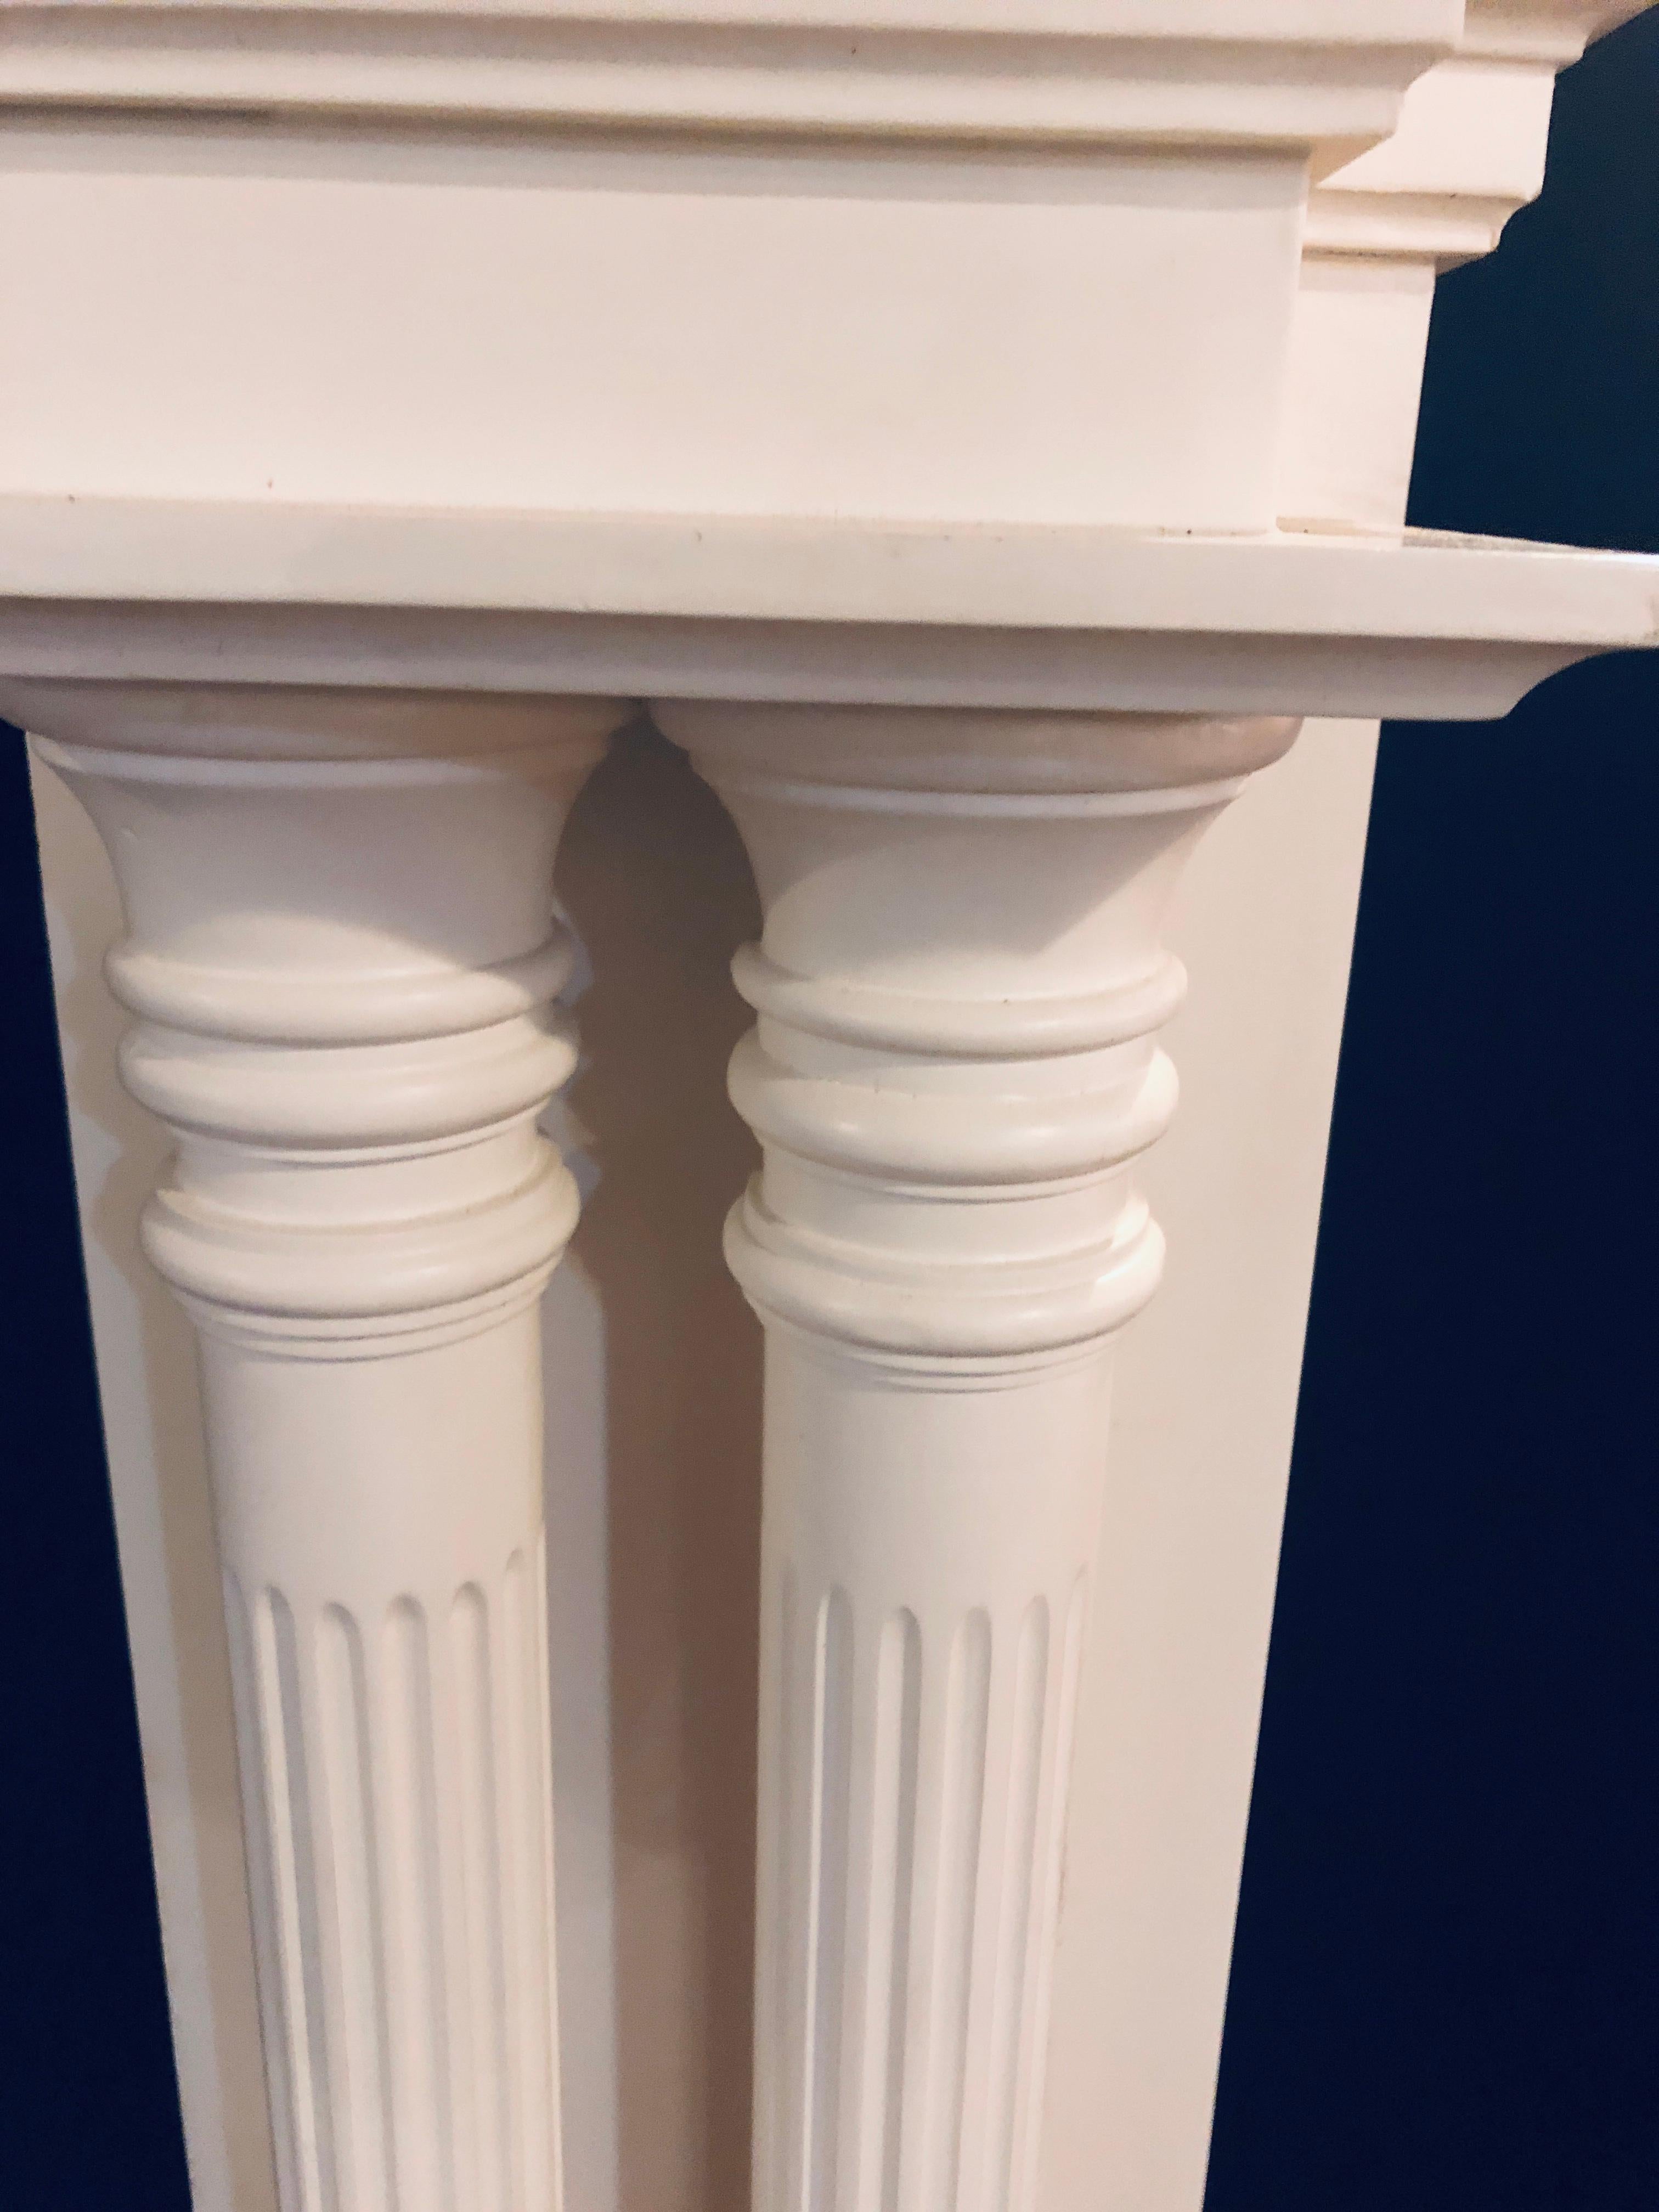 Monumental Hand Carved Neoclassical Fire Place Surrounds In Good Condition For Sale In Stamford, CT